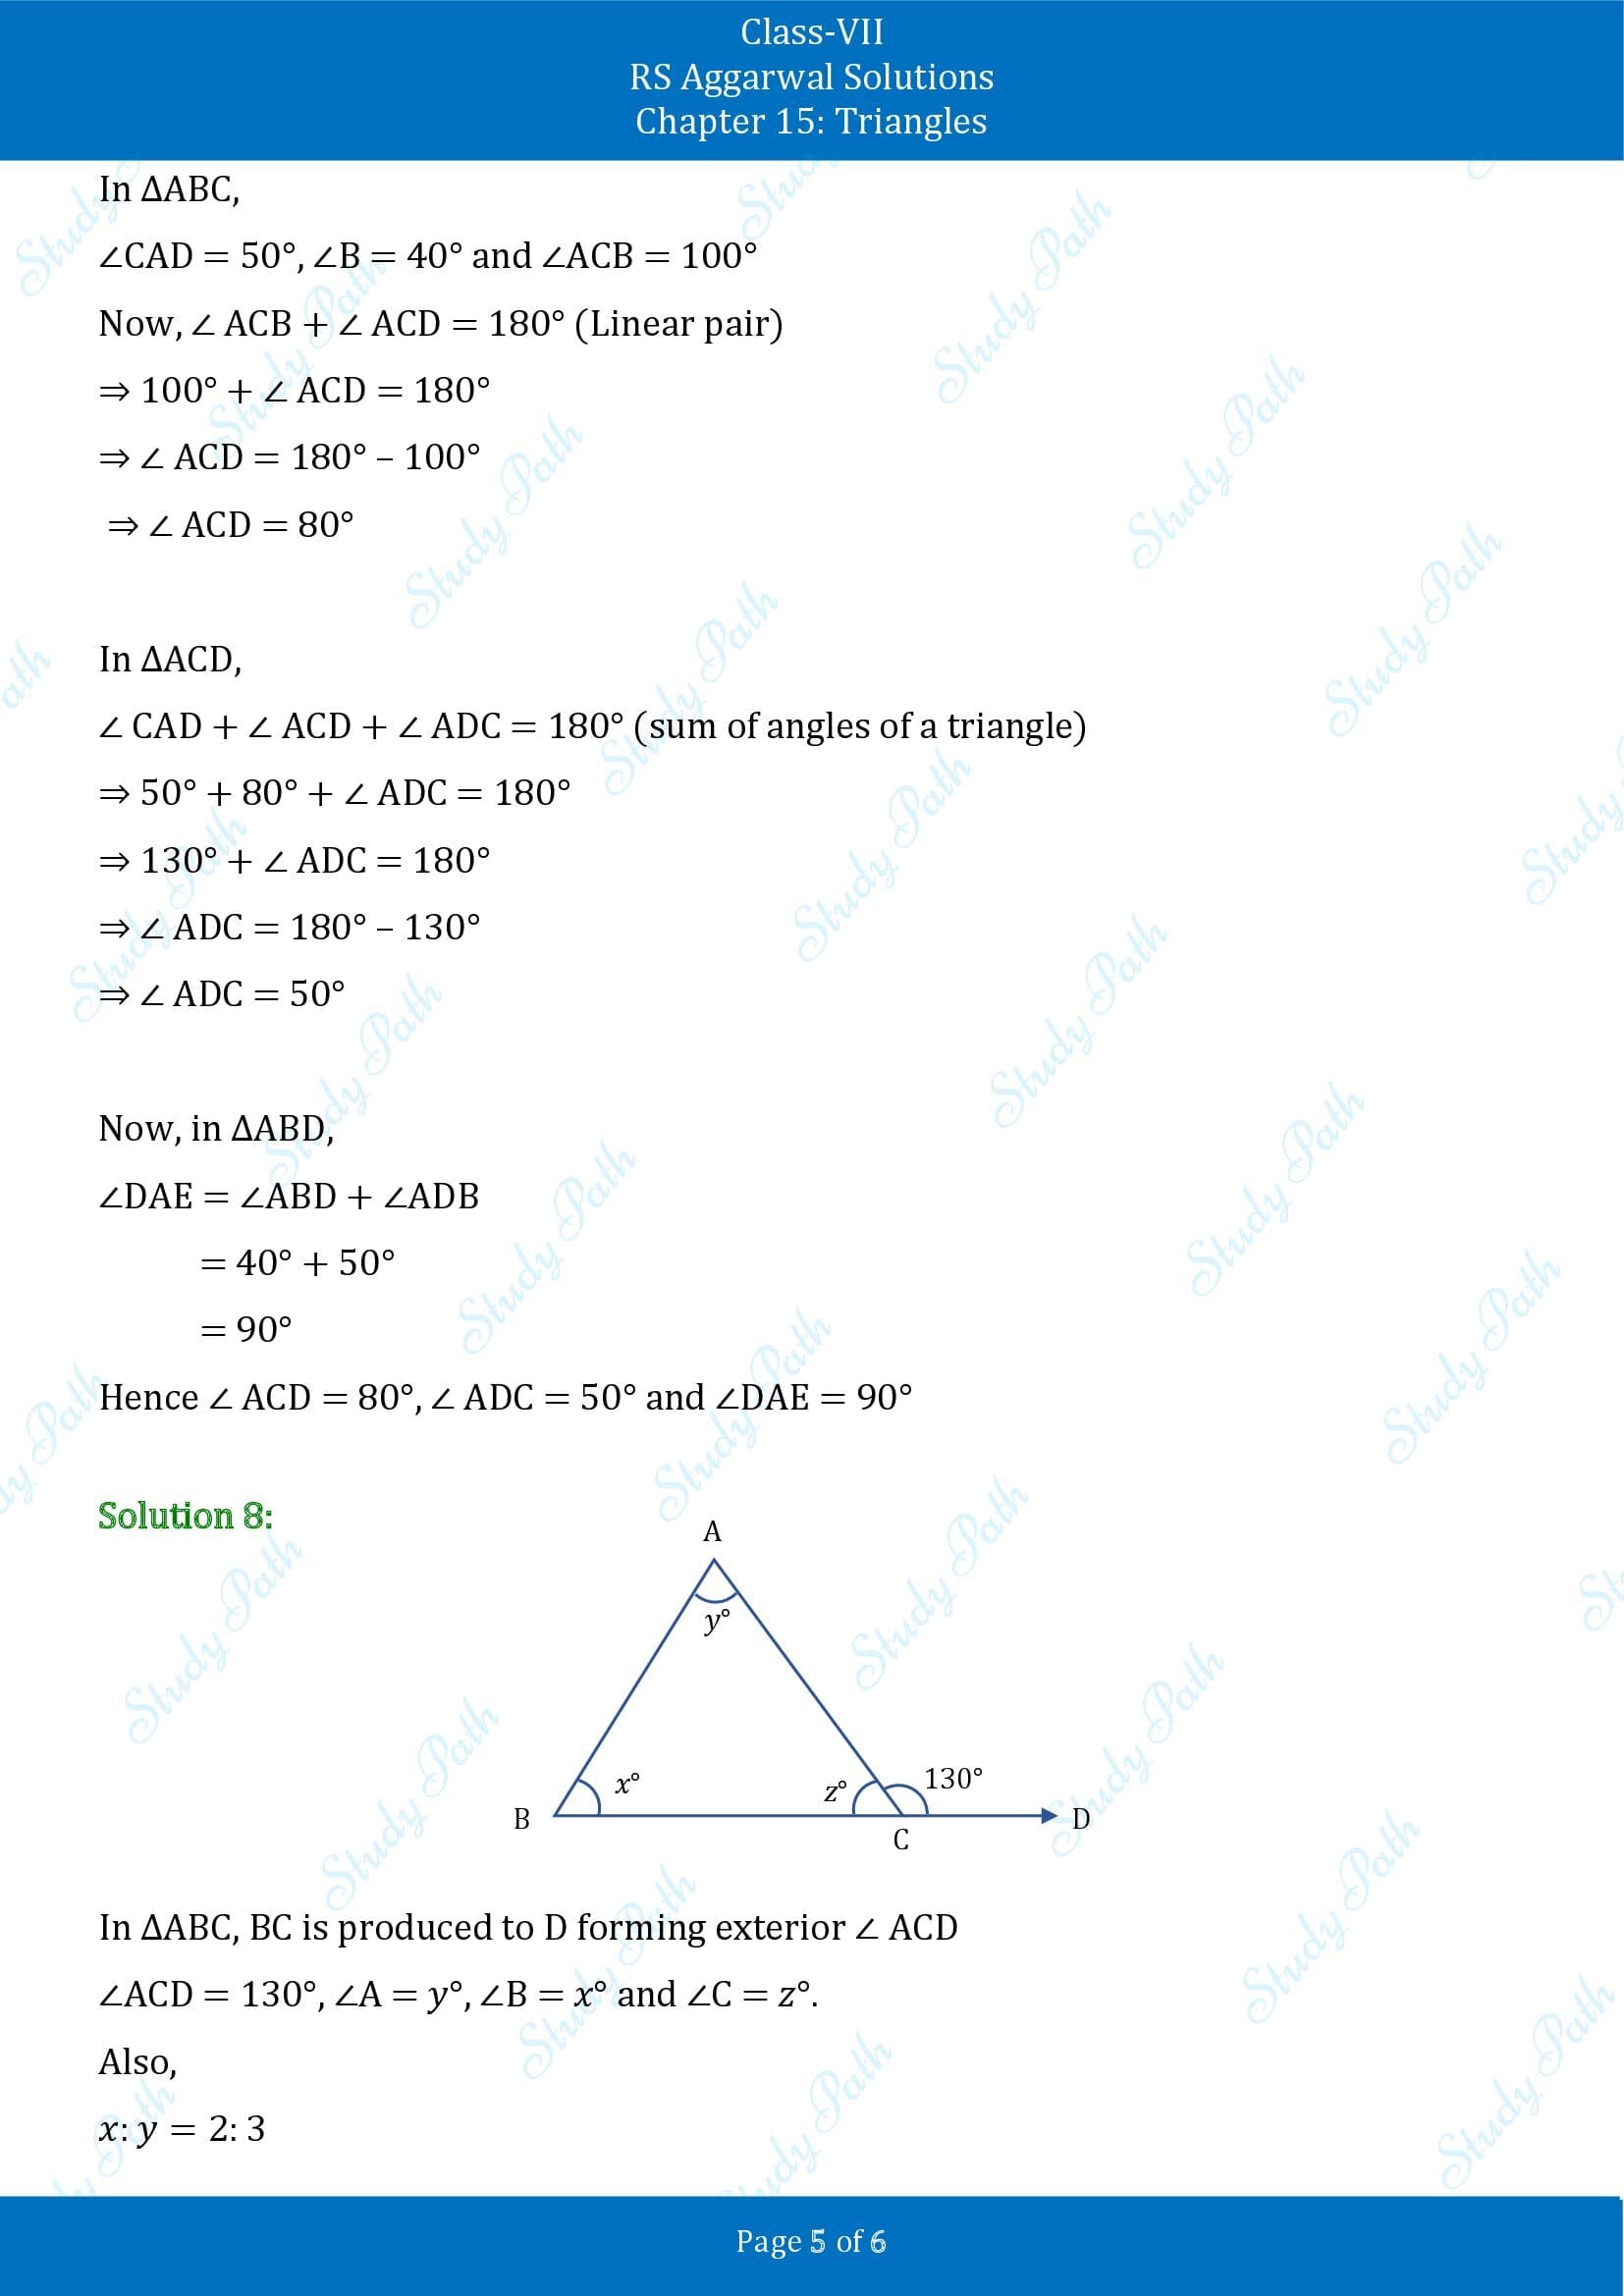 RS Aggarwal Solutions Class 7 Chapter 15 Triangles Exercise 15B 00005